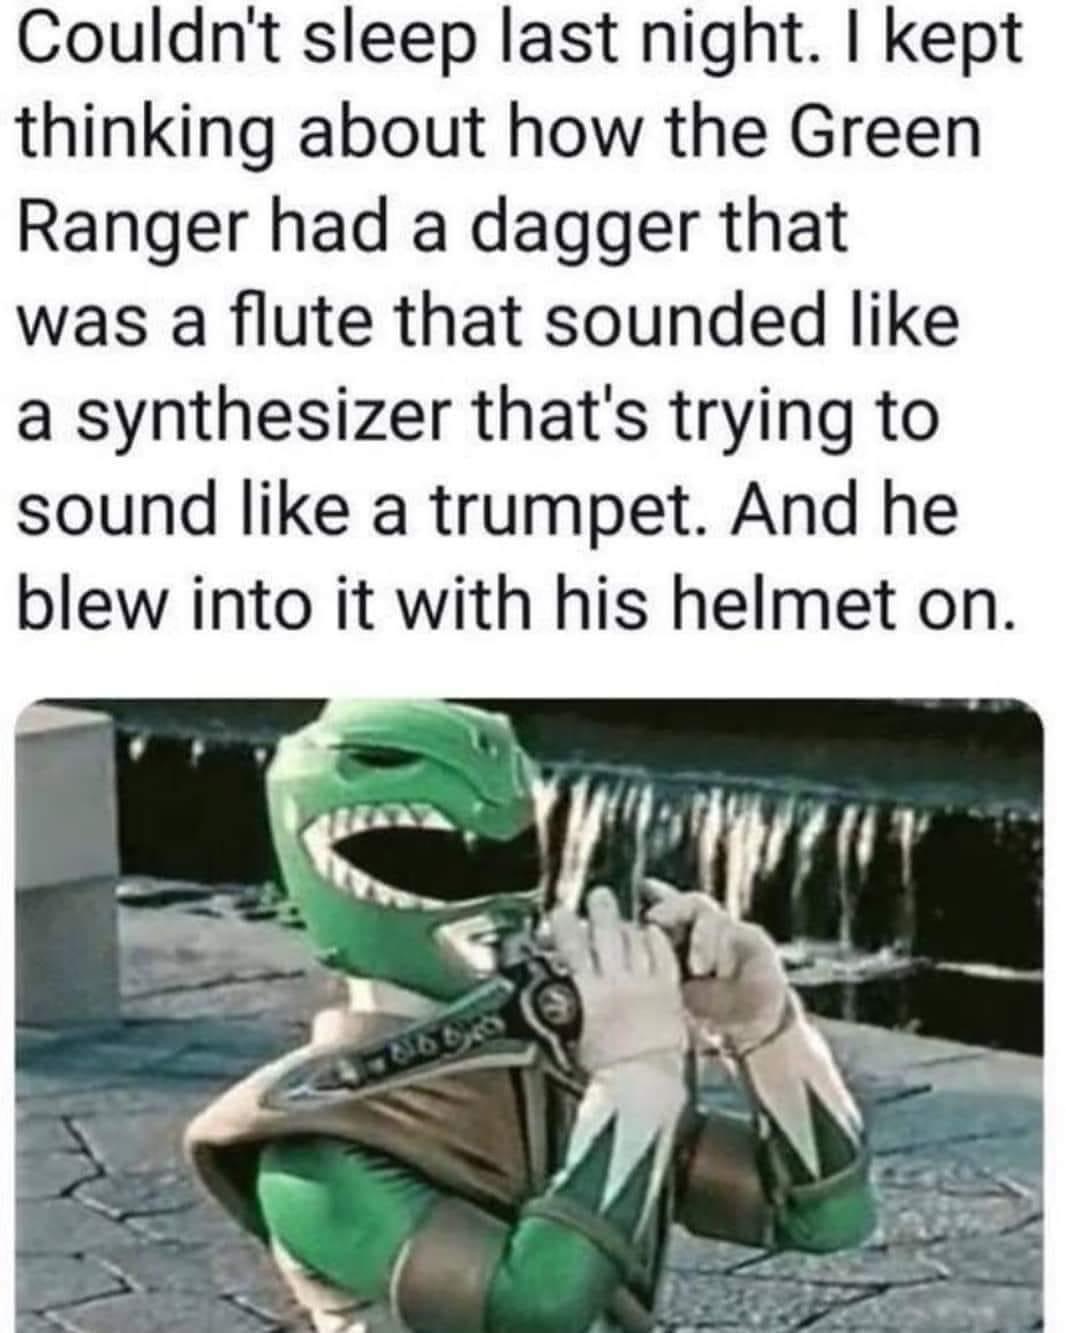 couldn t sleep last night green ranger - Couldn't sleep last night. I kept thinking about how the Green Ranger had a dagger that was a flute that sounded a synthesizer that's trying to sound a trumpet. And he blew into it with his helmet on.